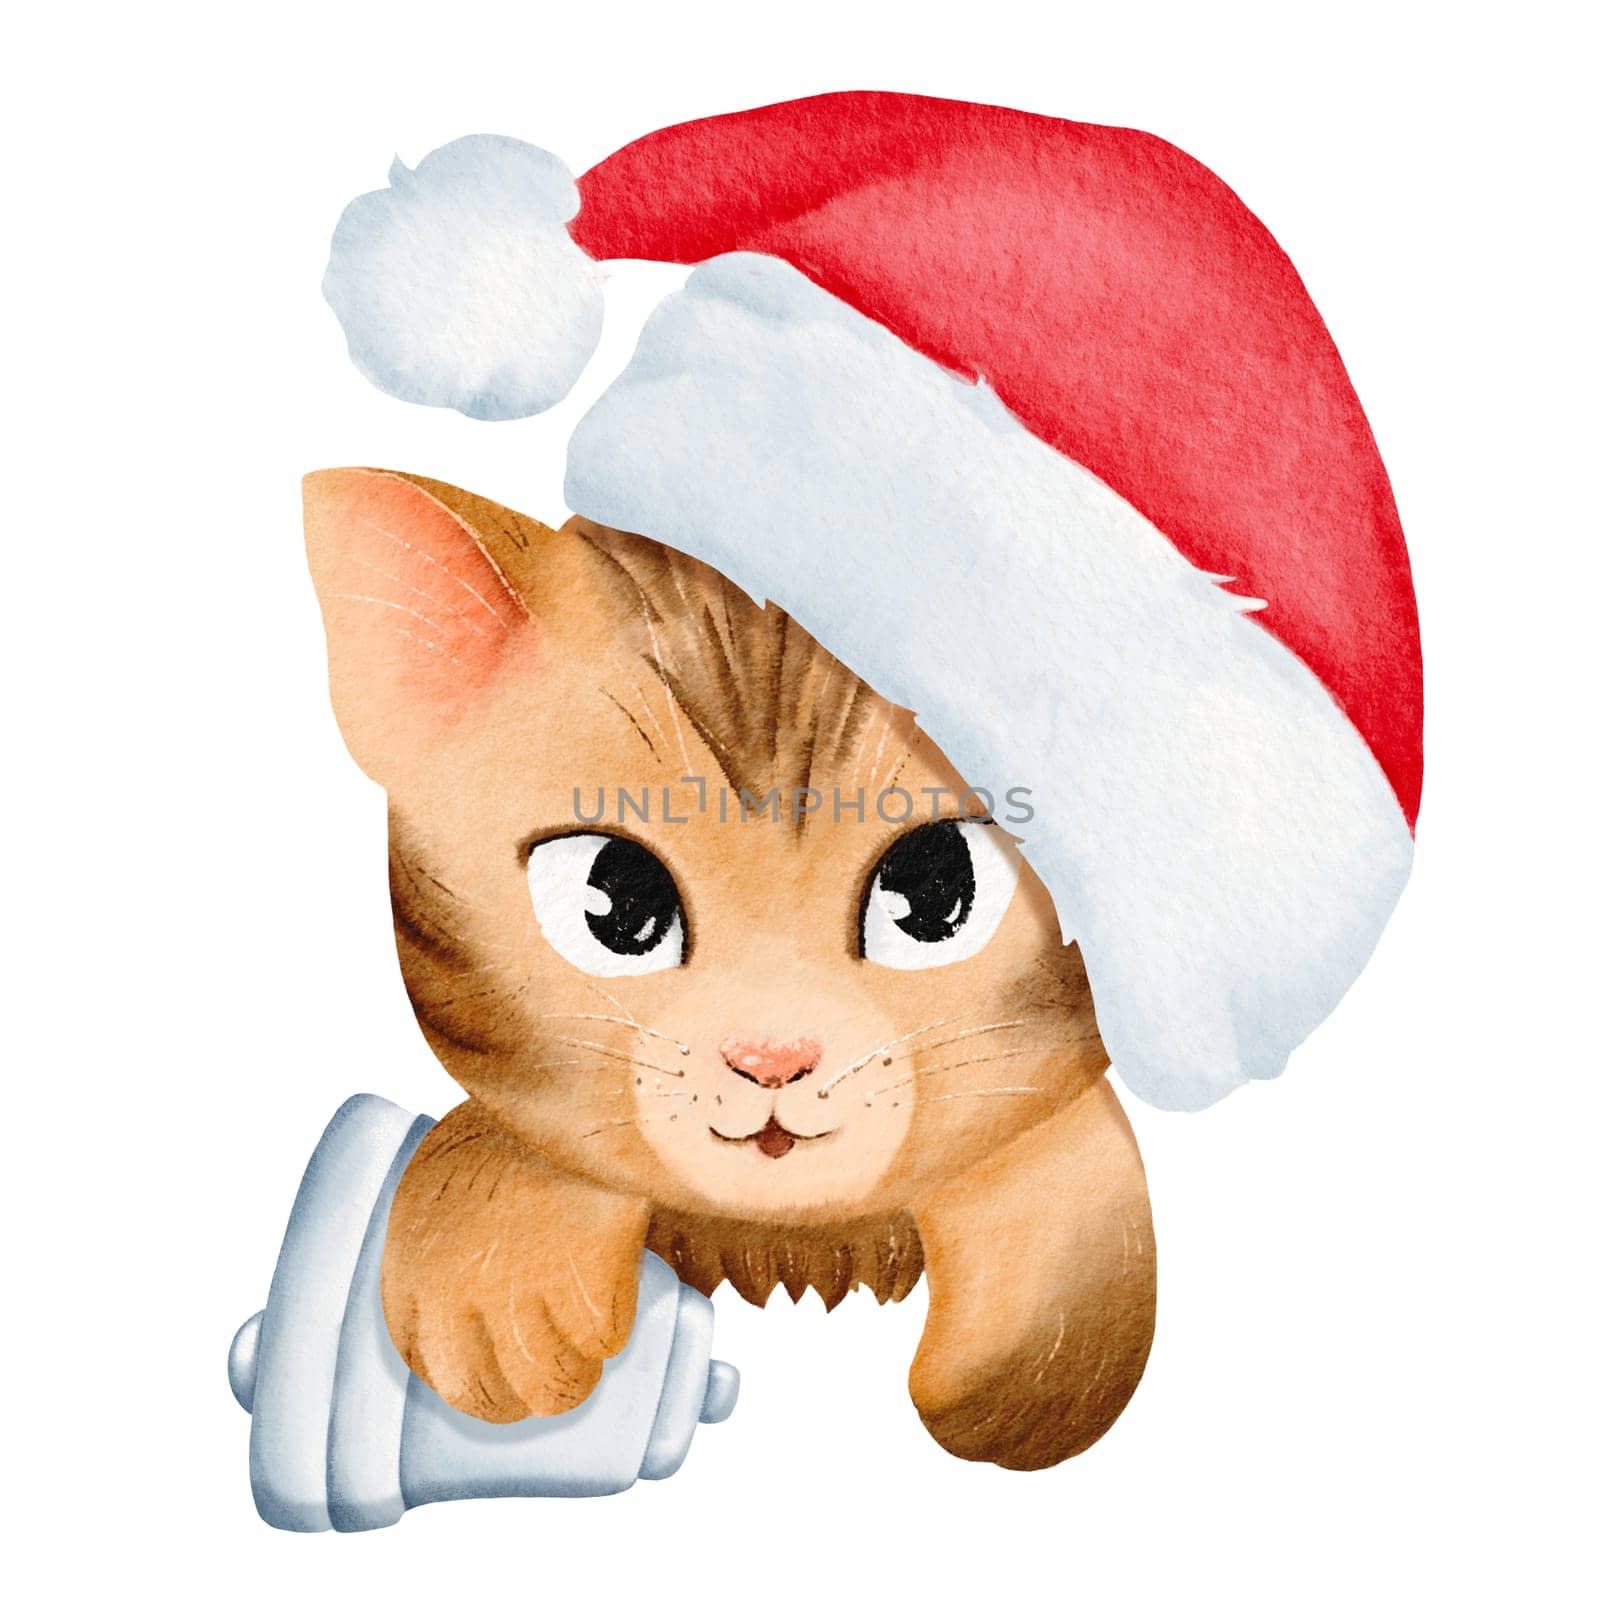 Adorable striped kitten in a Santa hat holds a Christmas bell. Cartoon portrait of a cat exudes a festive new year mood. Ideal for cards, invites, posters, stickers. Watercolor illustration by Art_Mari_Ka